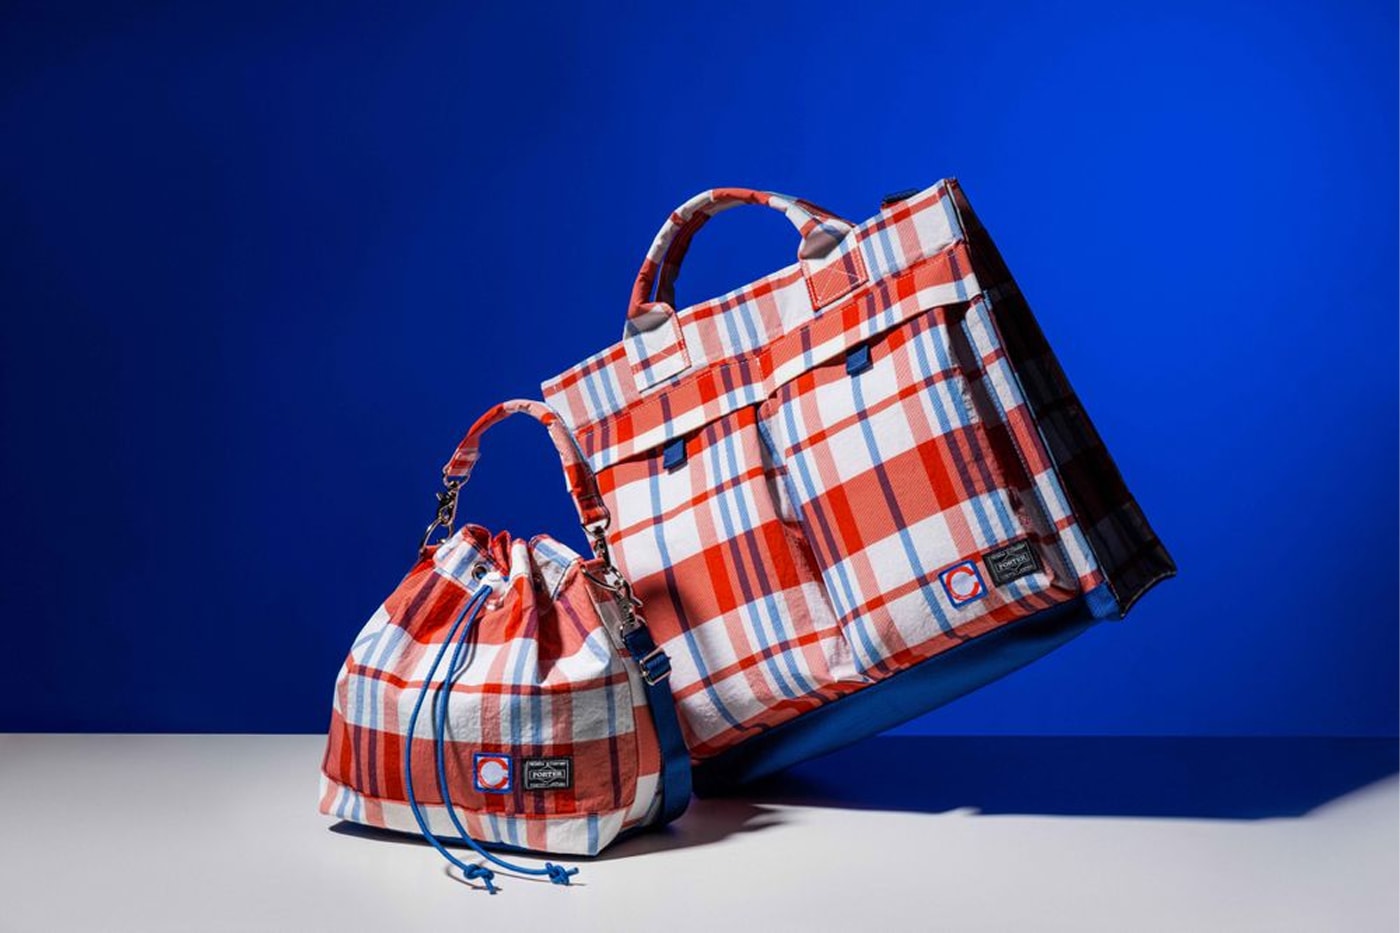 CLOT and PORTER Reconnect for Tartan Bag Series